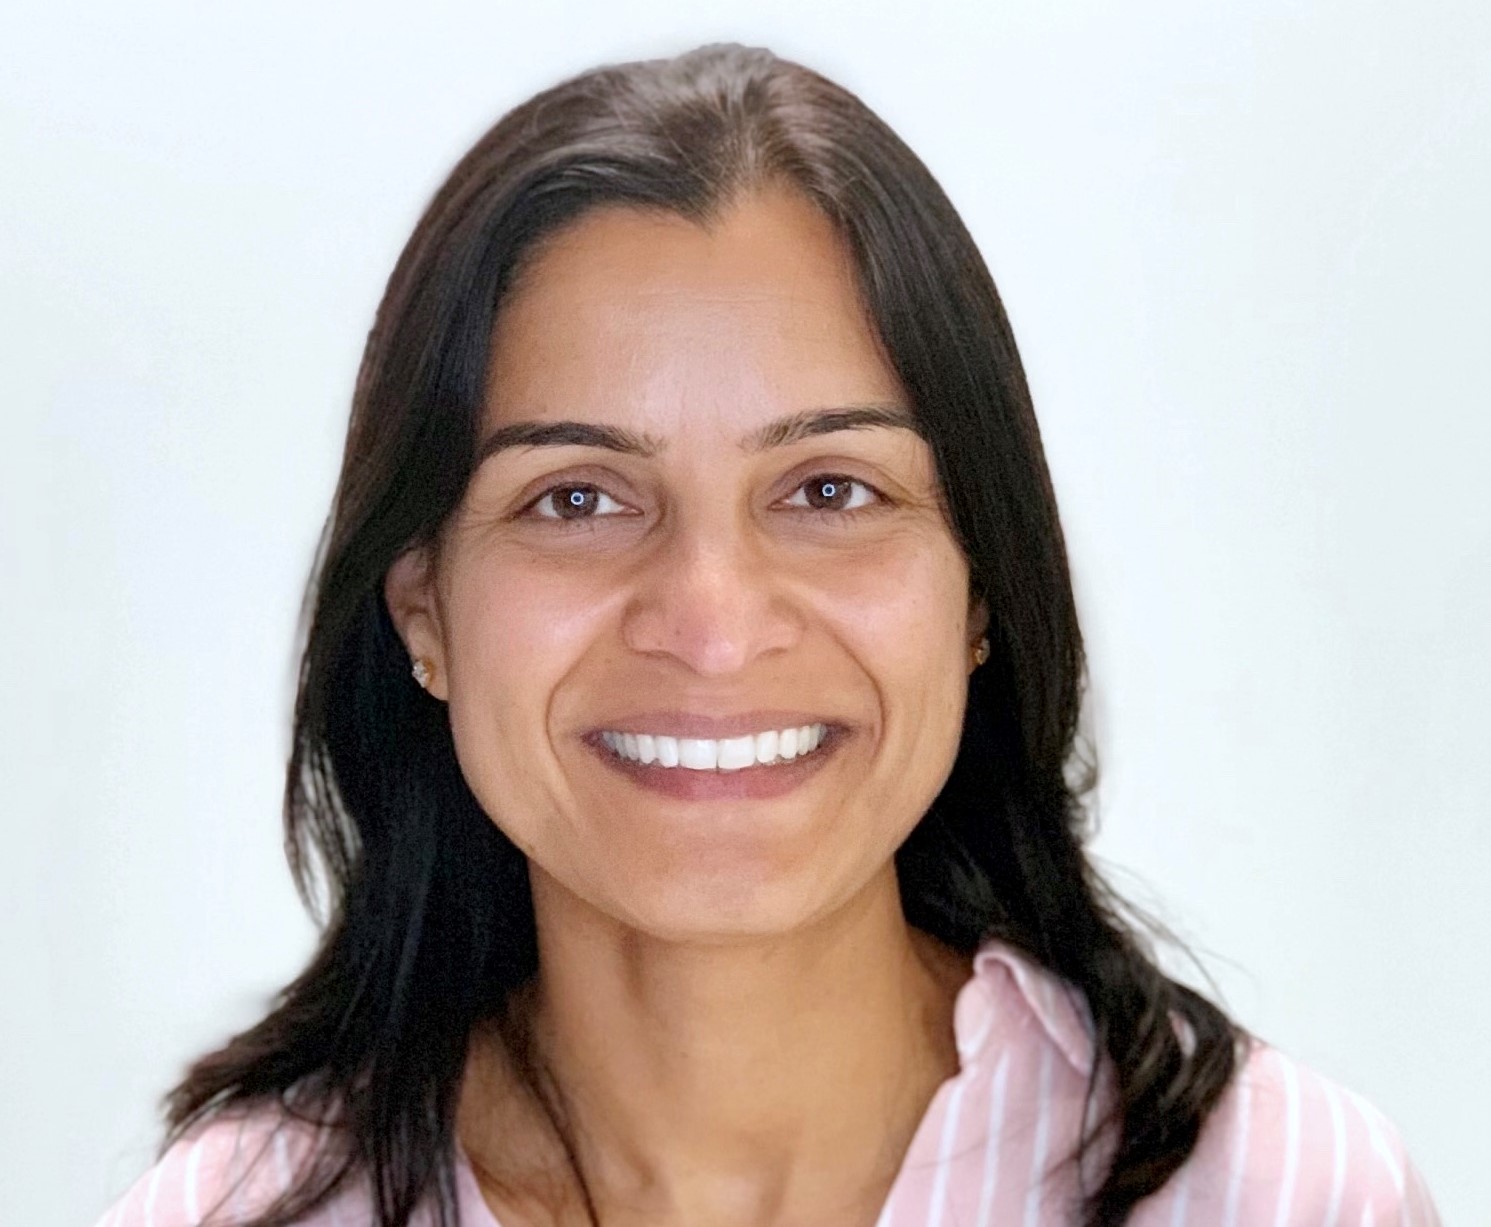 Dr. Ranjani Varadan, former VP of R&D at Impossible Foods, takes on all-new role as Shiru’s official scientific advisor